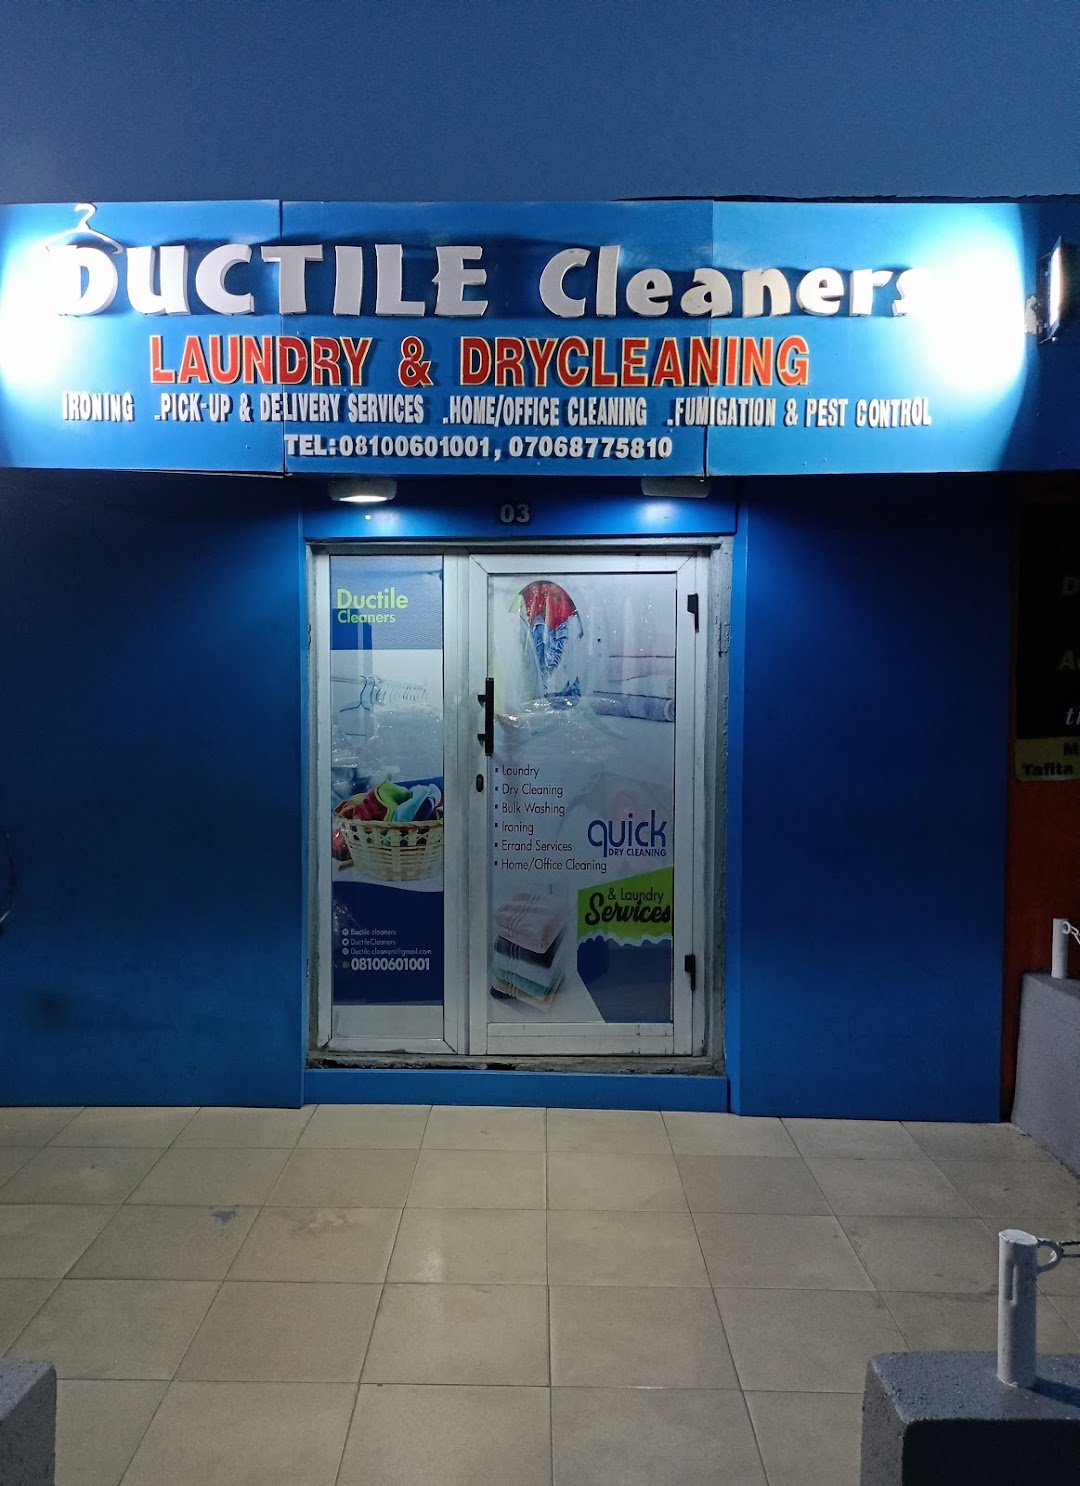 Ductile Cleaners